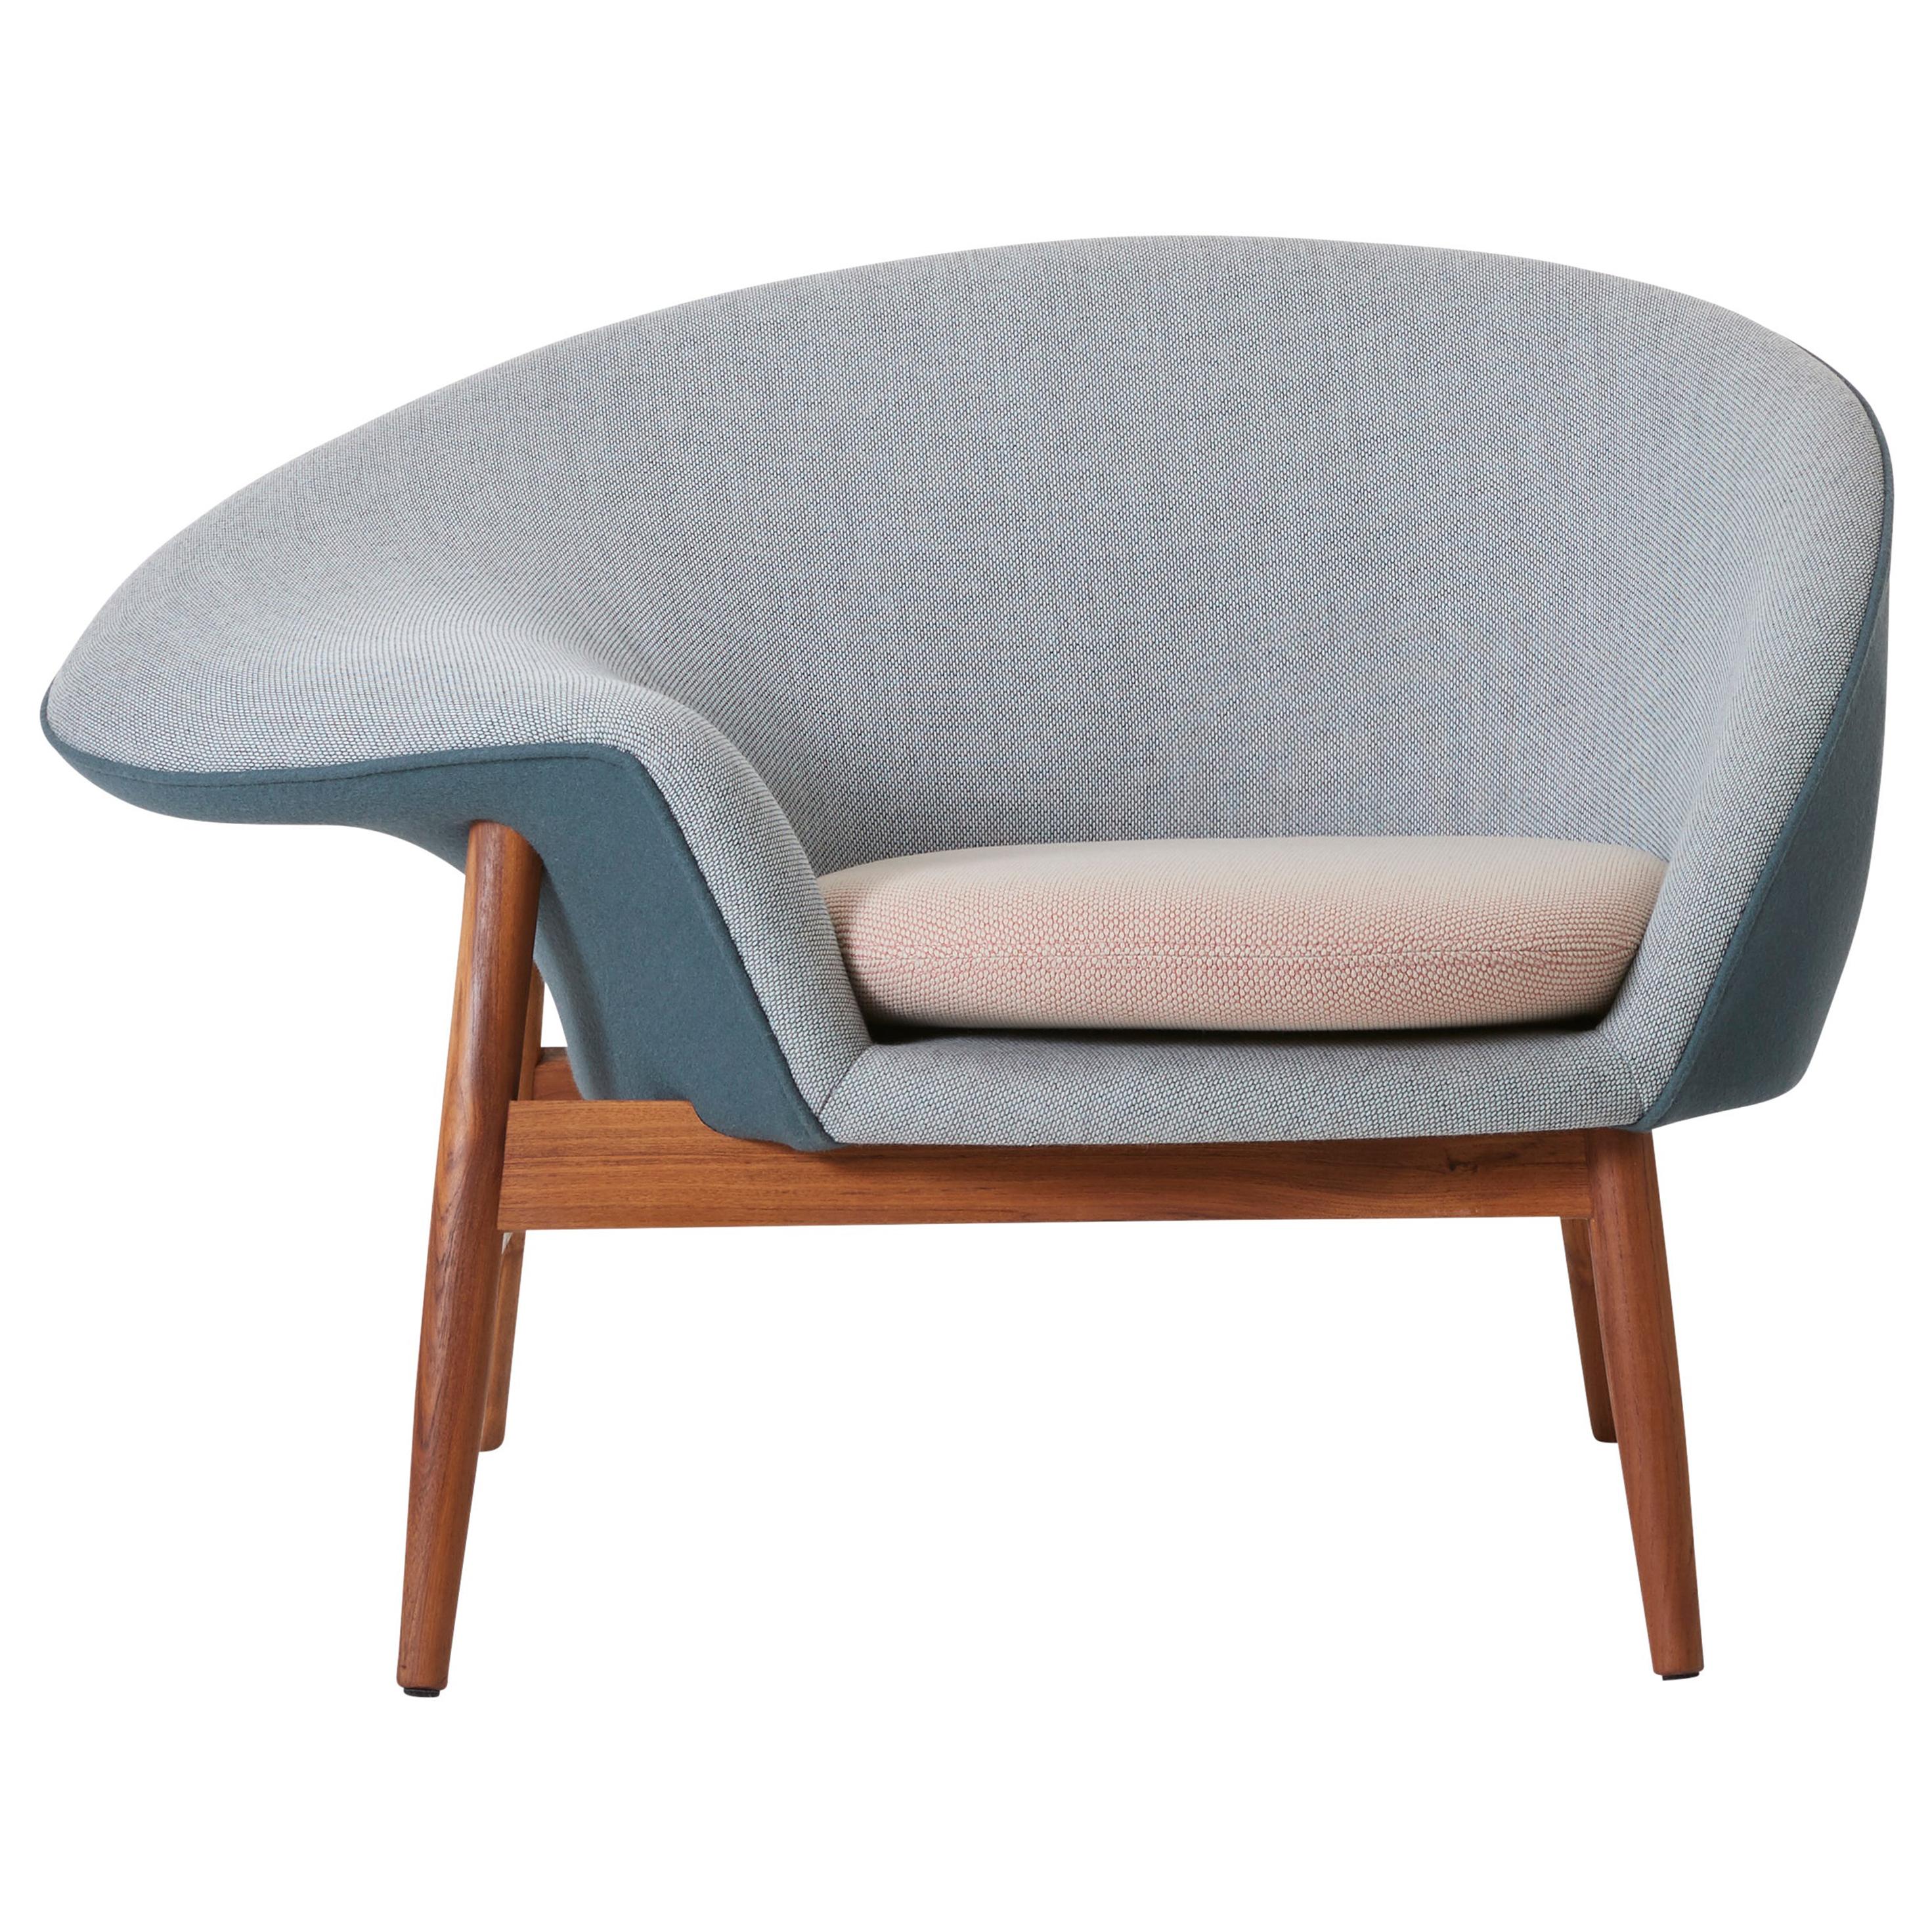 For Sale: Blue (Hero 991,Rewo828,Merit034) Fried Egg Three Tone Chair, by Hans Olsen from Warm Nordic